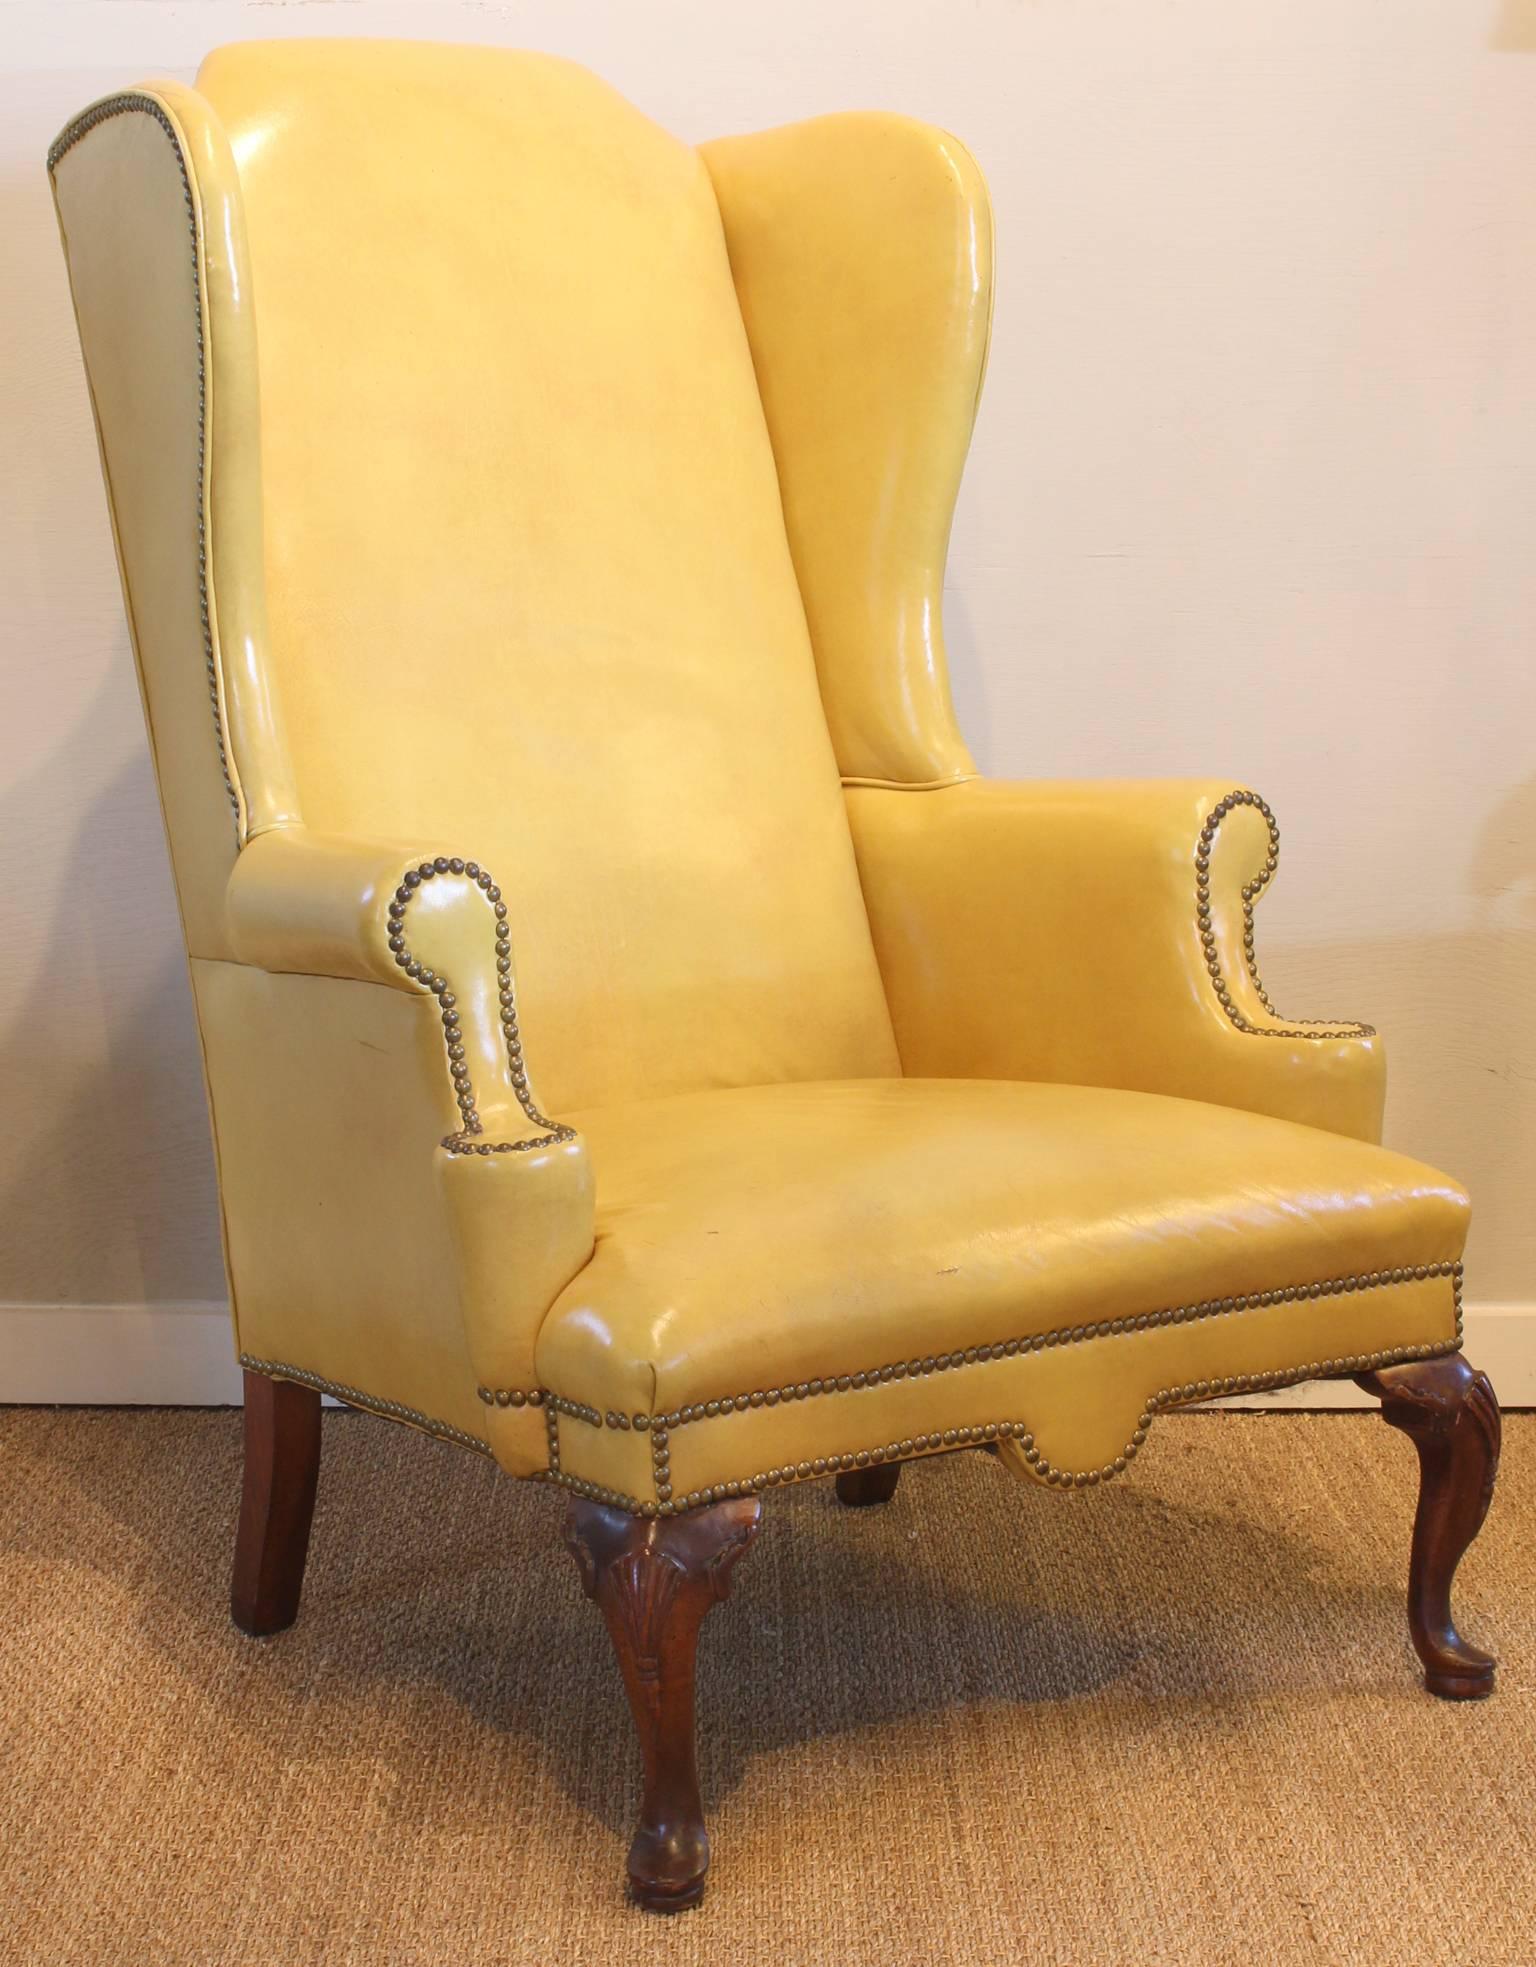 A delightful 1940s stylized Georgian wing chair with an unusually tall back in its original mustard yellow leather upholstery accented with brass nailheads.